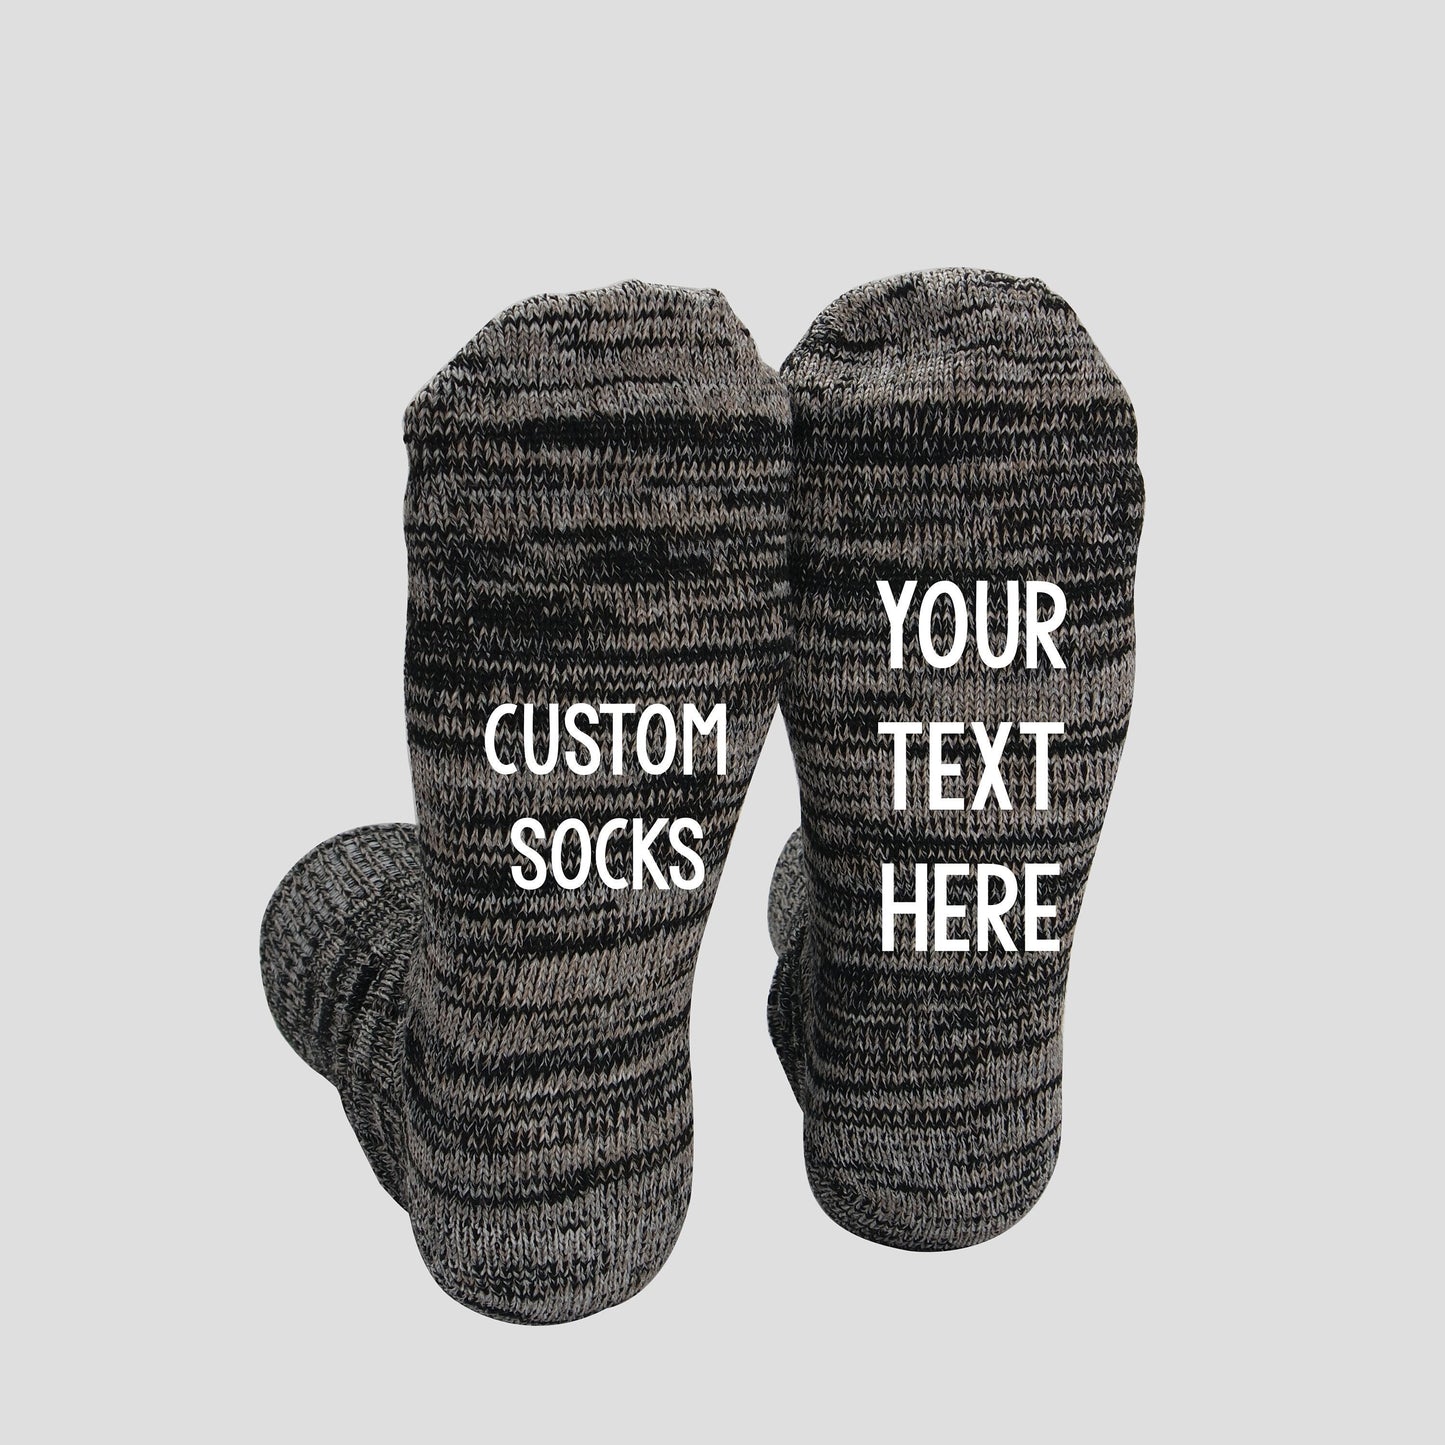 Custom Text Socks, Personalized Saying Socks, If You Can Read This Socks, Personalized Birthday Gift, Gag Gifts, Gift For Him, Best Friend